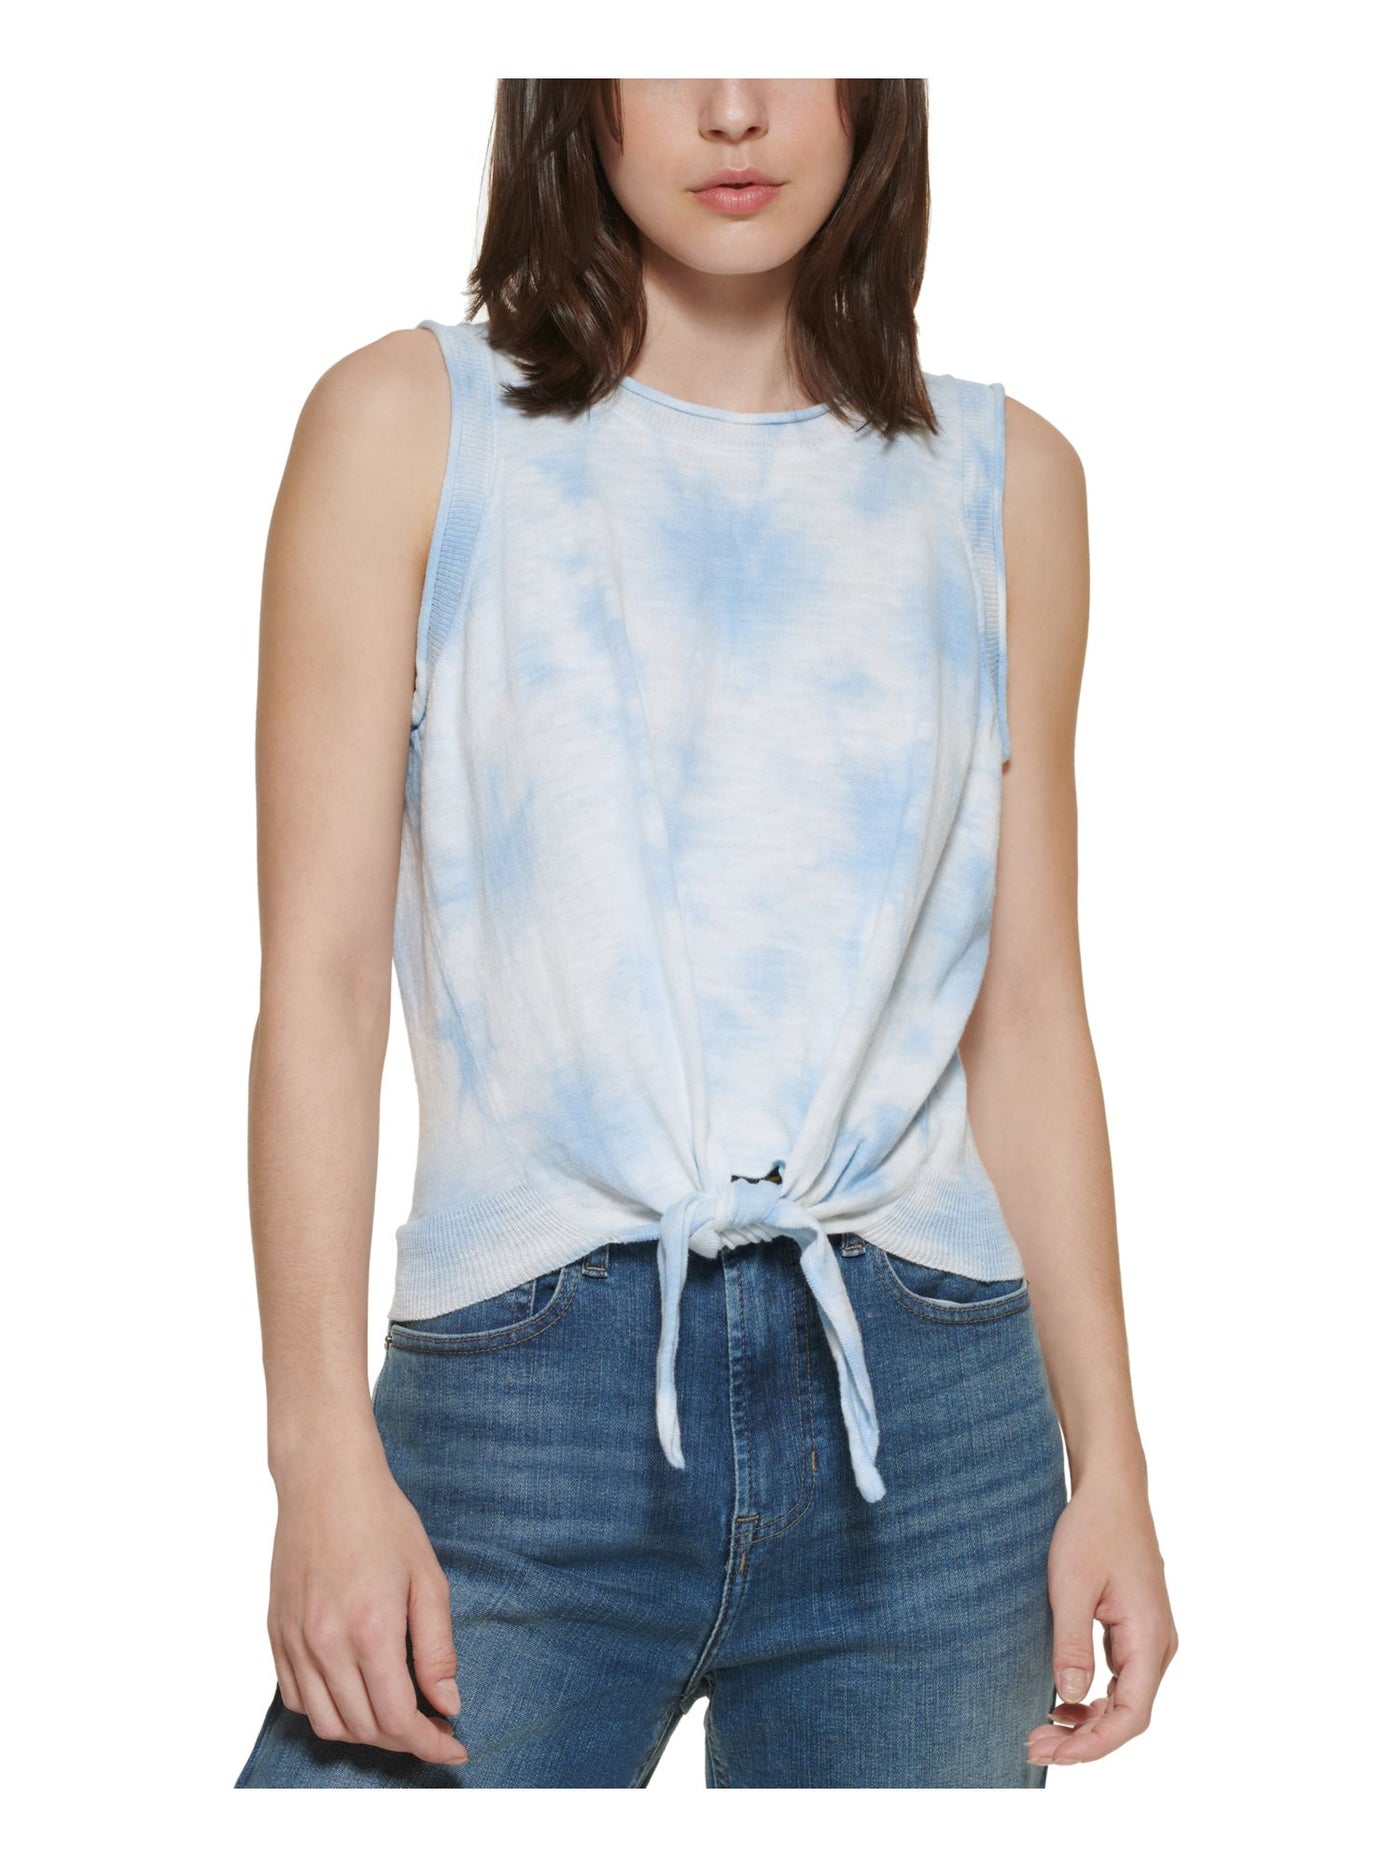 DKNY JEANS Womens White Ribbed Tie Front Pullover Tie Dye Sleeveless Crew Neck Tank Top S